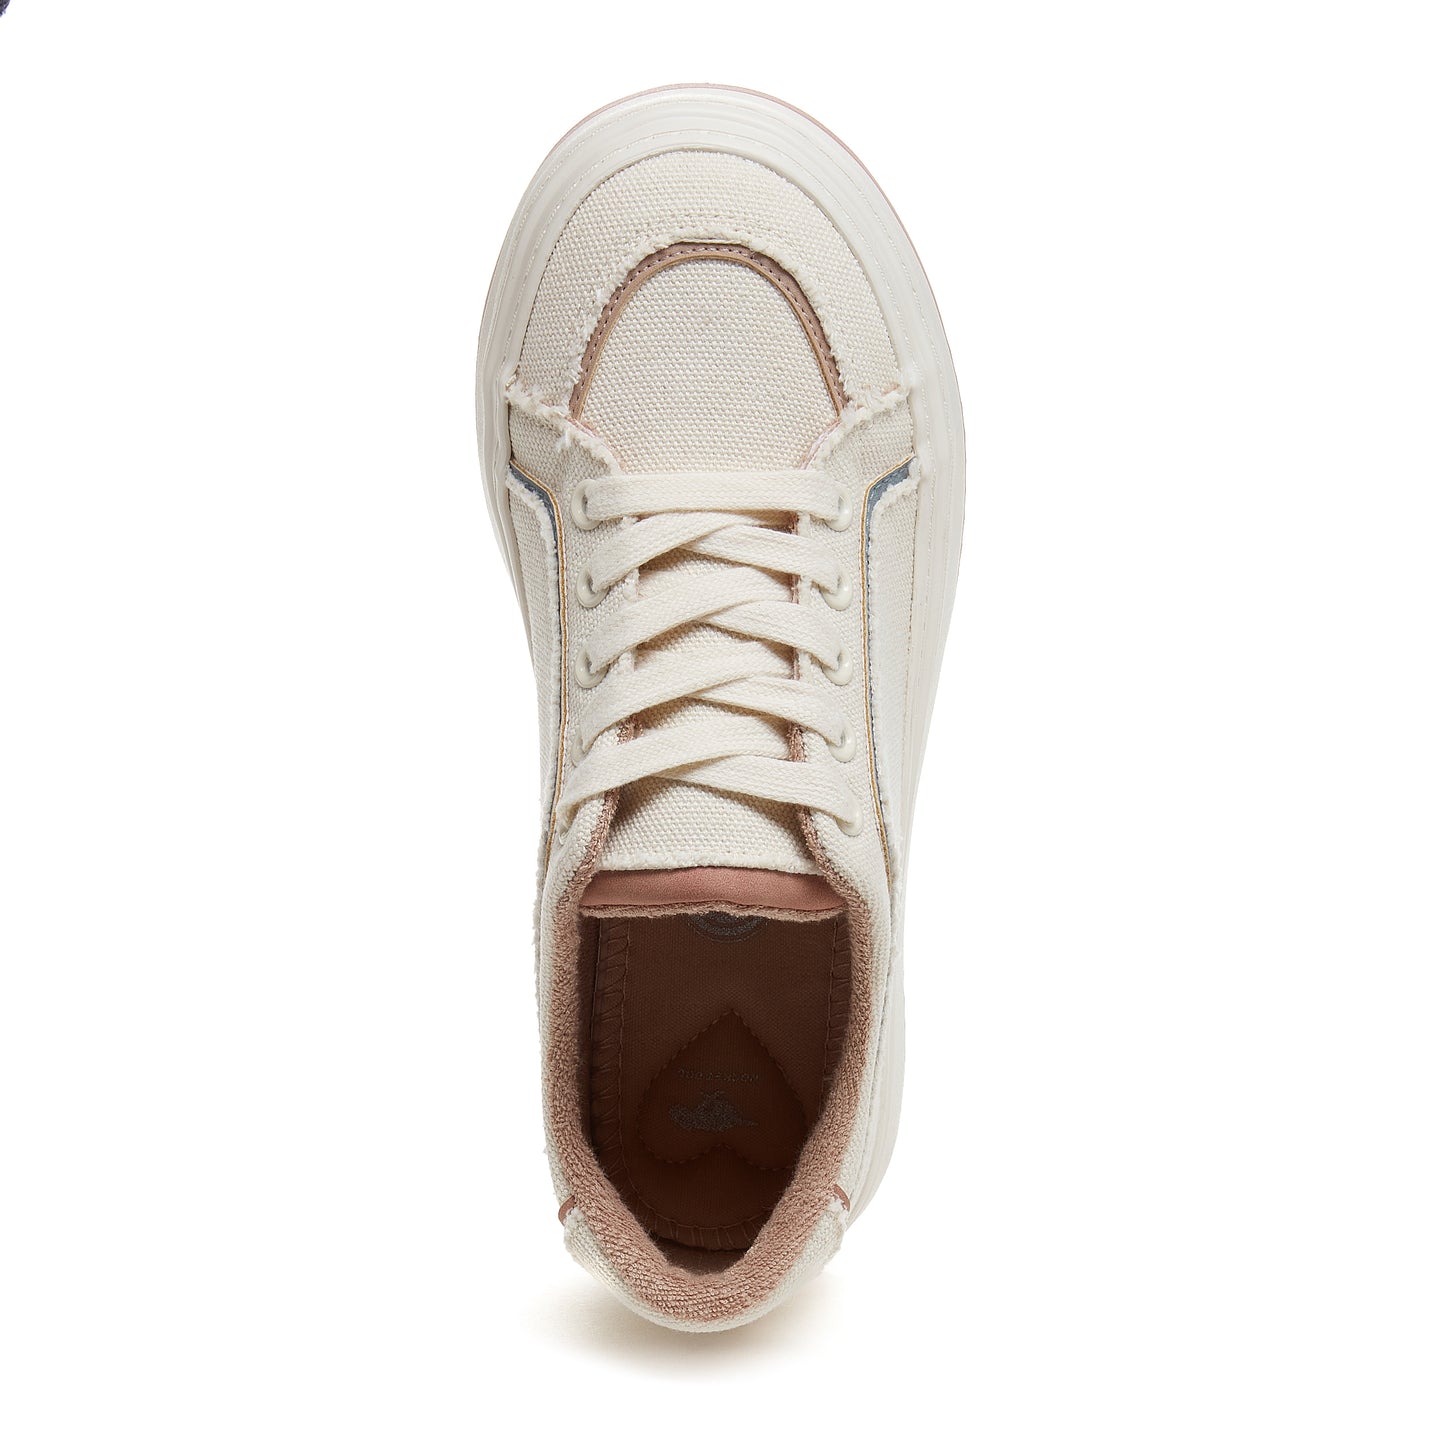 Rocket Dog Carey Natural Sneaker: Comfort Meets Cool for Every Adventure